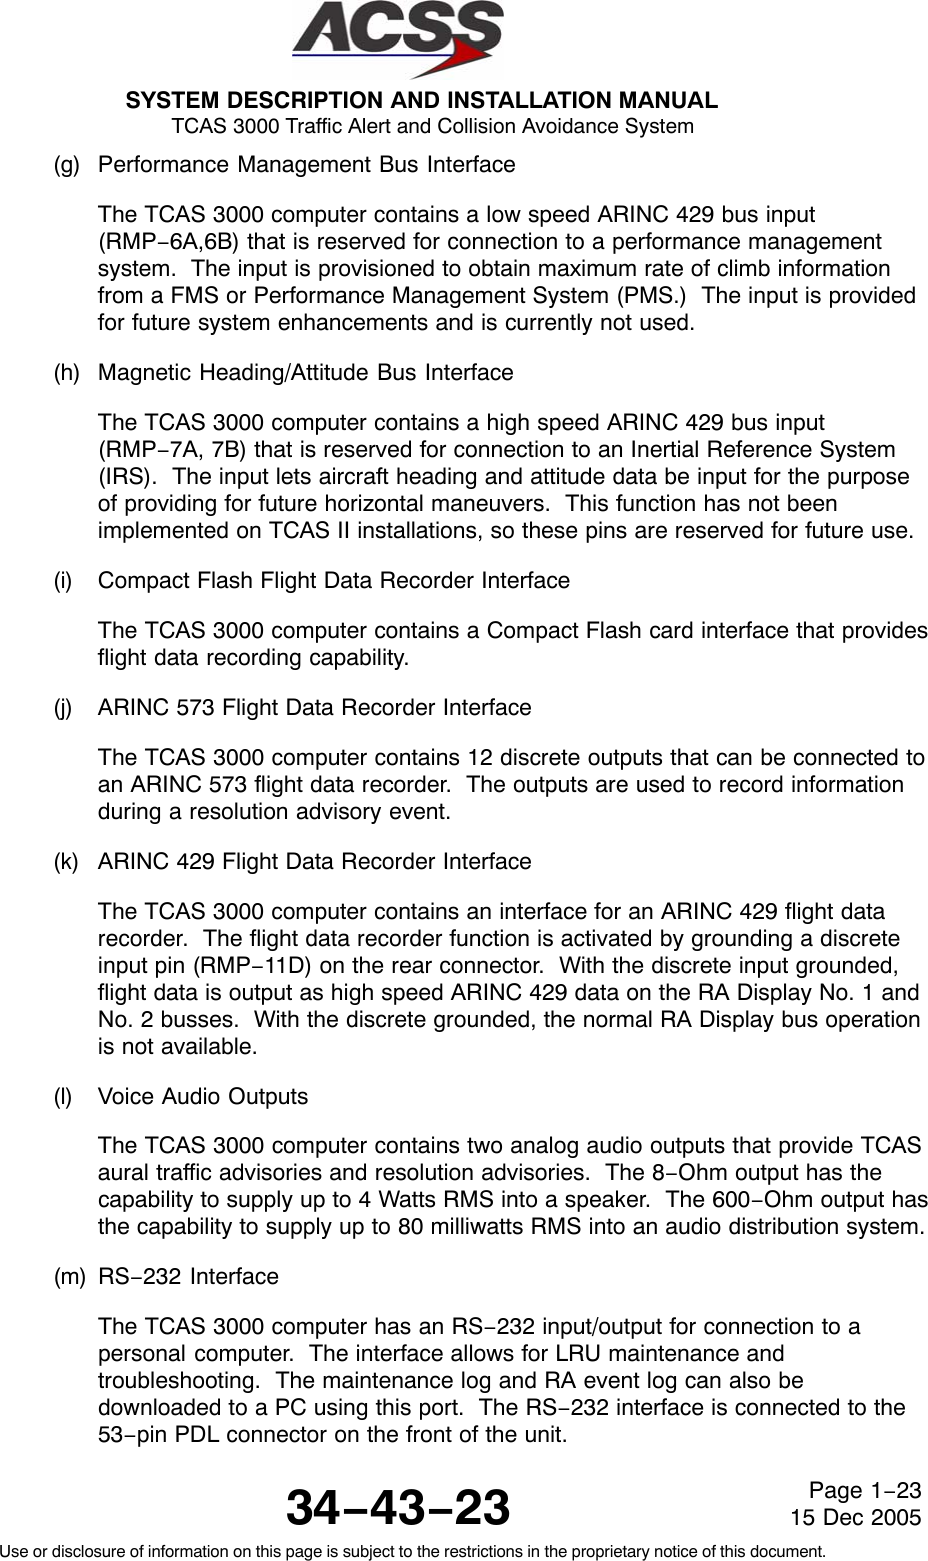 SYSTEM DESCRIPTION AND INSTALLATION MANUAL TCAS 3000 Traffic Alert and Collision Avoidance System34−43−23Use or disclosure of information on this page is subject to the restrictions in the proprietary notice of this document.Page 1−2315 Dec 2005(g) Performance Management Bus InterfaceThe TCAS 3000 computer contains a low speed ARINC 429 bus input(RMP−6A,6B) that is reserved for connection to a performance managementsystem.  The input is provisioned to obtain maximum rate of climb informationfrom a FMS or Performance Management System (PMS.)  The input is providedfor future system enhancements and is currently not used.(h) Magnetic Heading/Attitude Bus InterfaceThe TCAS 3000 computer contains a high speed ARINC 429 bus input(RMP−7A, 7B) that is reserved for connection to an Inertial Reference System(IRS).  The input lets aircraft heading and attitude data be input for the purposeof providing for future horizontal maneuvers.  This function has not beenimplemented on TCAS II installations, so these pins are reserved for future use.(i) Compact Flash Flight Data Recorder InterfaceThe TCAS 3000 computer contains a Compact Flash card interface that providesflight data recording capability.(j) ARINC 573 Flight Data Recorder InterfaceThe TCAS 3000 computer contains 12 discrete outputs that can be connected toan ARINC 573 flight data recorder.  The outputs are used to record informationduring a resolution advisory event.(k) ARINC 429 Flight Data Recorder InterfaceThe TCAS 3000 computer contains an interface for an ARINC 429 flight datarecorder.  The flight data recorder function is activated by grounding a discreteinput pin (RMP−11D) on the rear connector.  With the discrete input grounded,flight data is output as high speed ARINC 429 data on the RA Display No. 1 andNo. 2 busses.  With the discrete grounded, the normal RA Display bus operationis not available.(l) Voice Audio OutputsThe TCAS 3000 computer contains two analog audio outputs that provide TCASaural traffic advisories and resolution advisories.  The 8−Ohm output has thecapability to supply up to 4 Watts RMS into a speaker.  The 600−Ohm output hasthe capability to supply up to 80 milliwatts RMS into an audio distribution system.(m) RS−232 InterfaceThe TCAS 3000 computer has an RS−232 input/output for connection to apersonal computer.  The interface allows for LRU maintenance andtroubleshooting.  The maintenance log and RA event log can also bedownloaded to a PC using this port.  The RS−232 interface is connected to the53−pin PDL connector on the front of the unit.